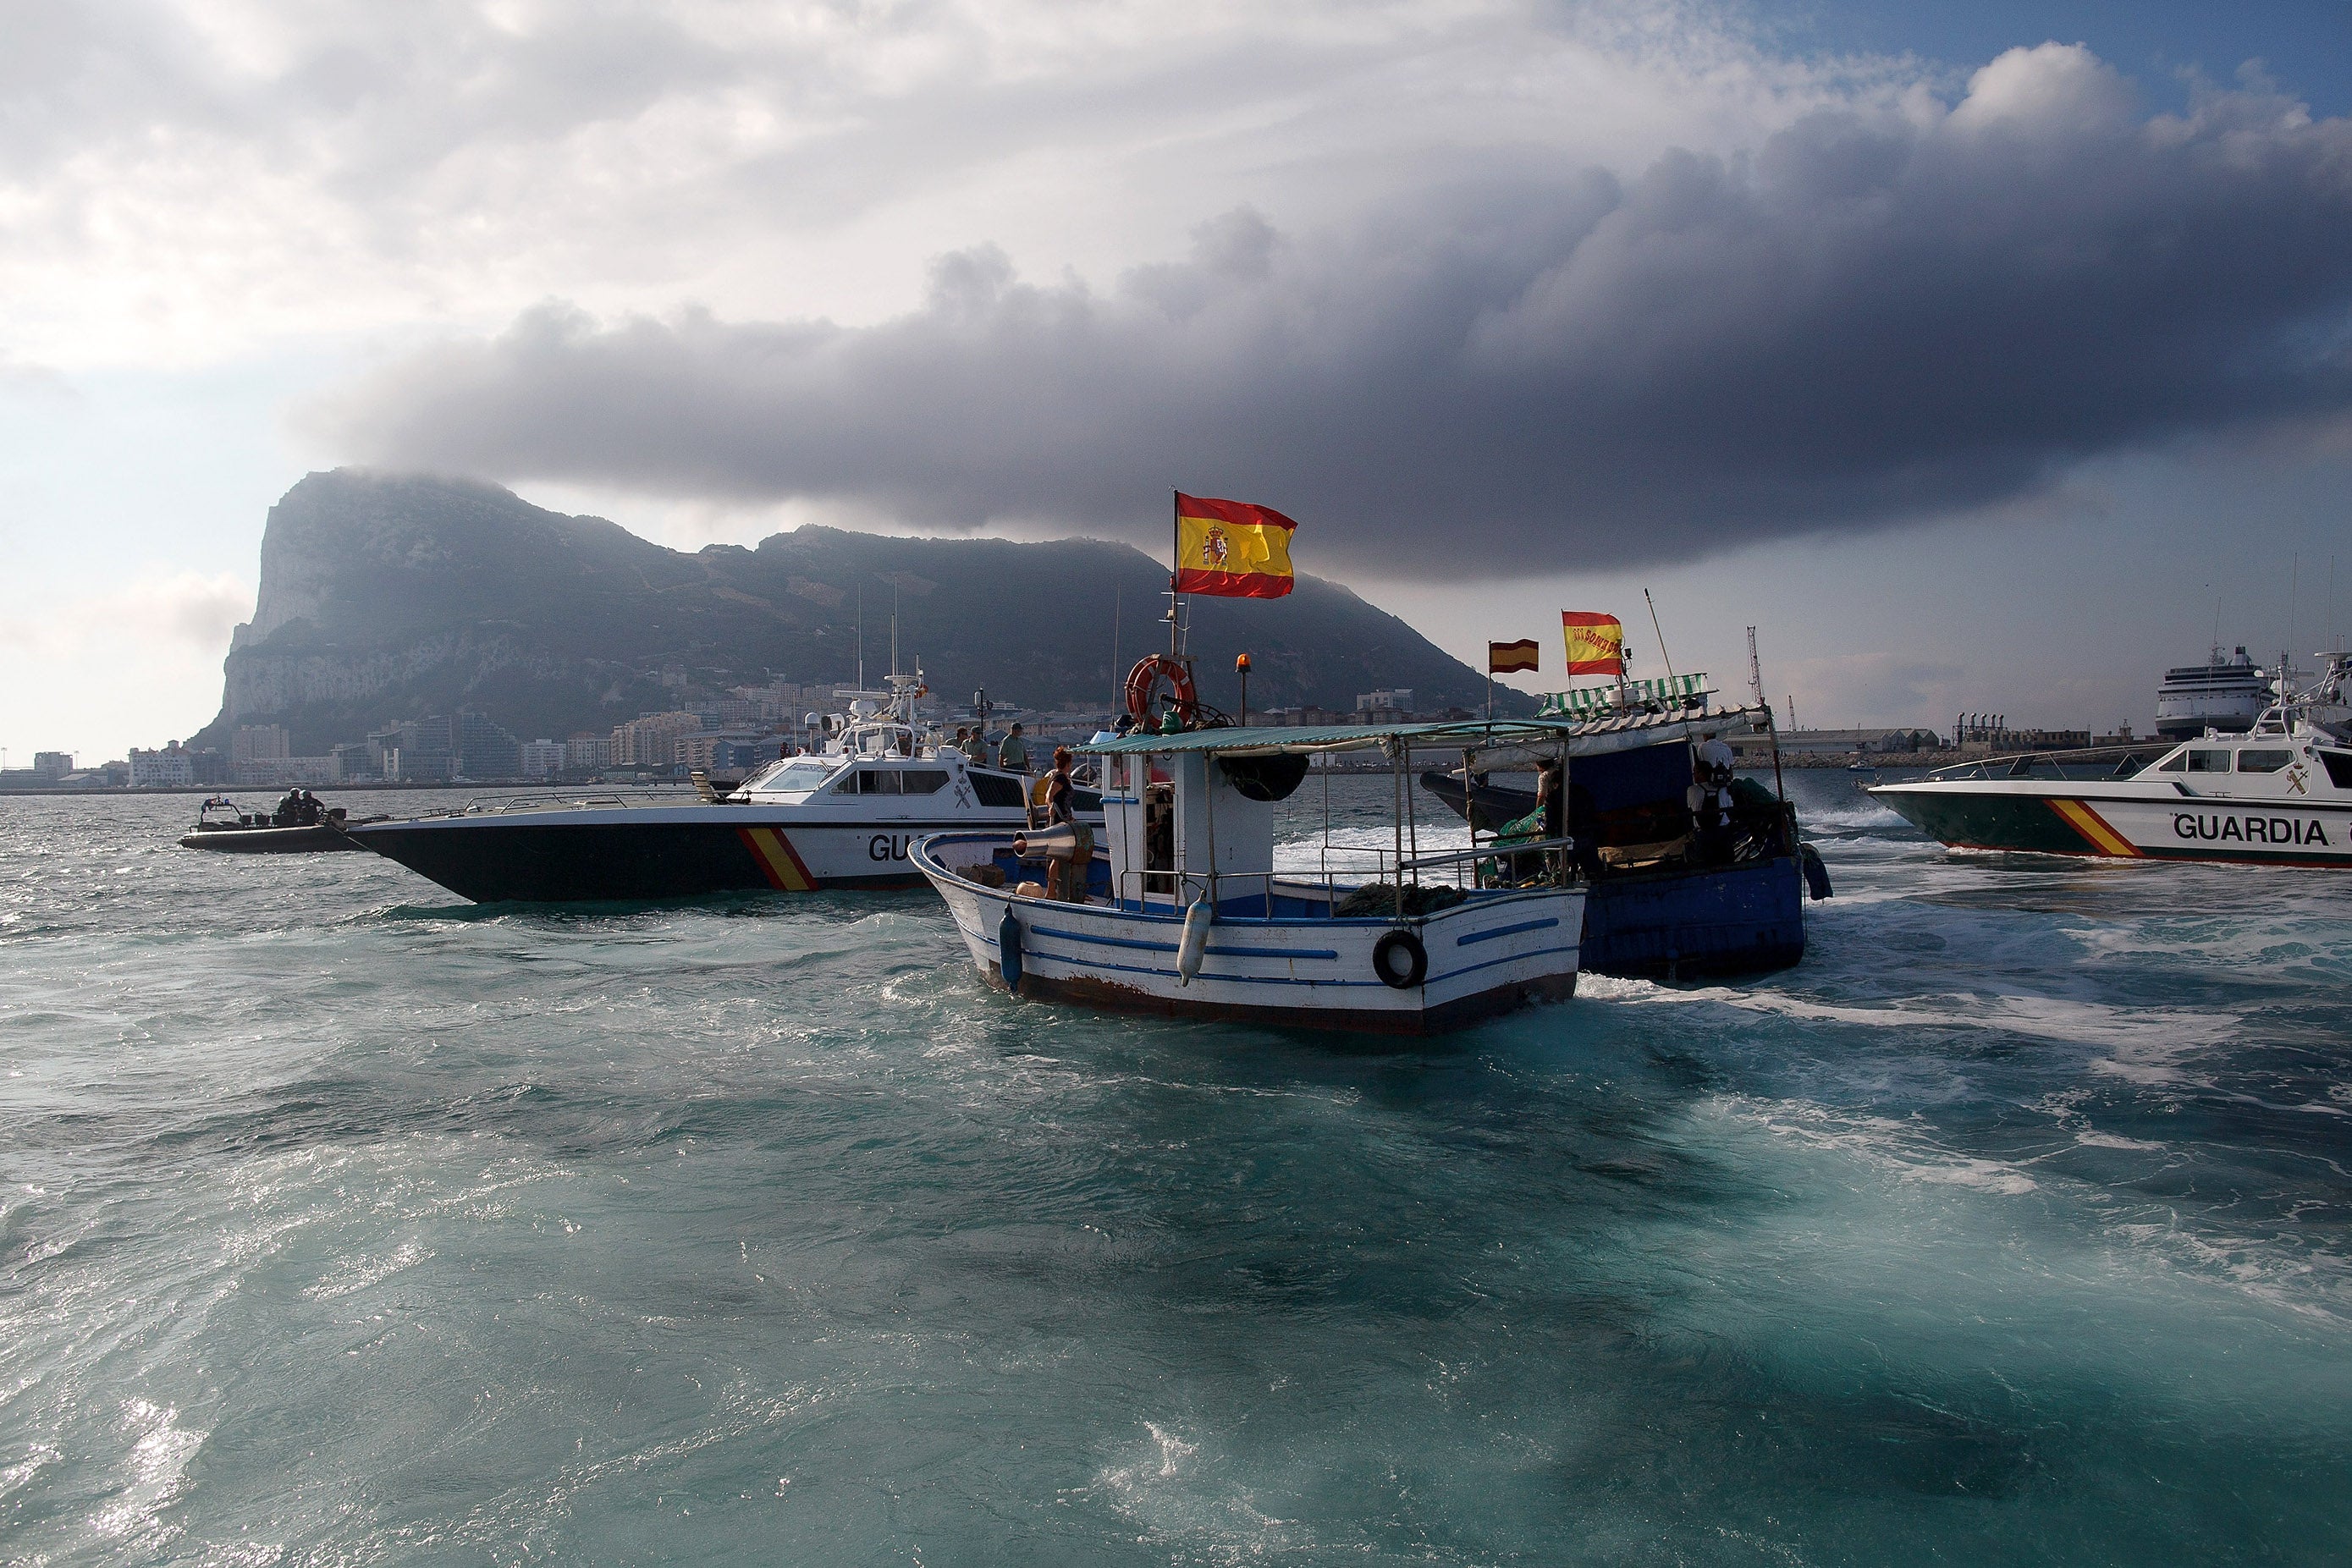 Spanish fishermen stage a protest over fishing rights in 2013